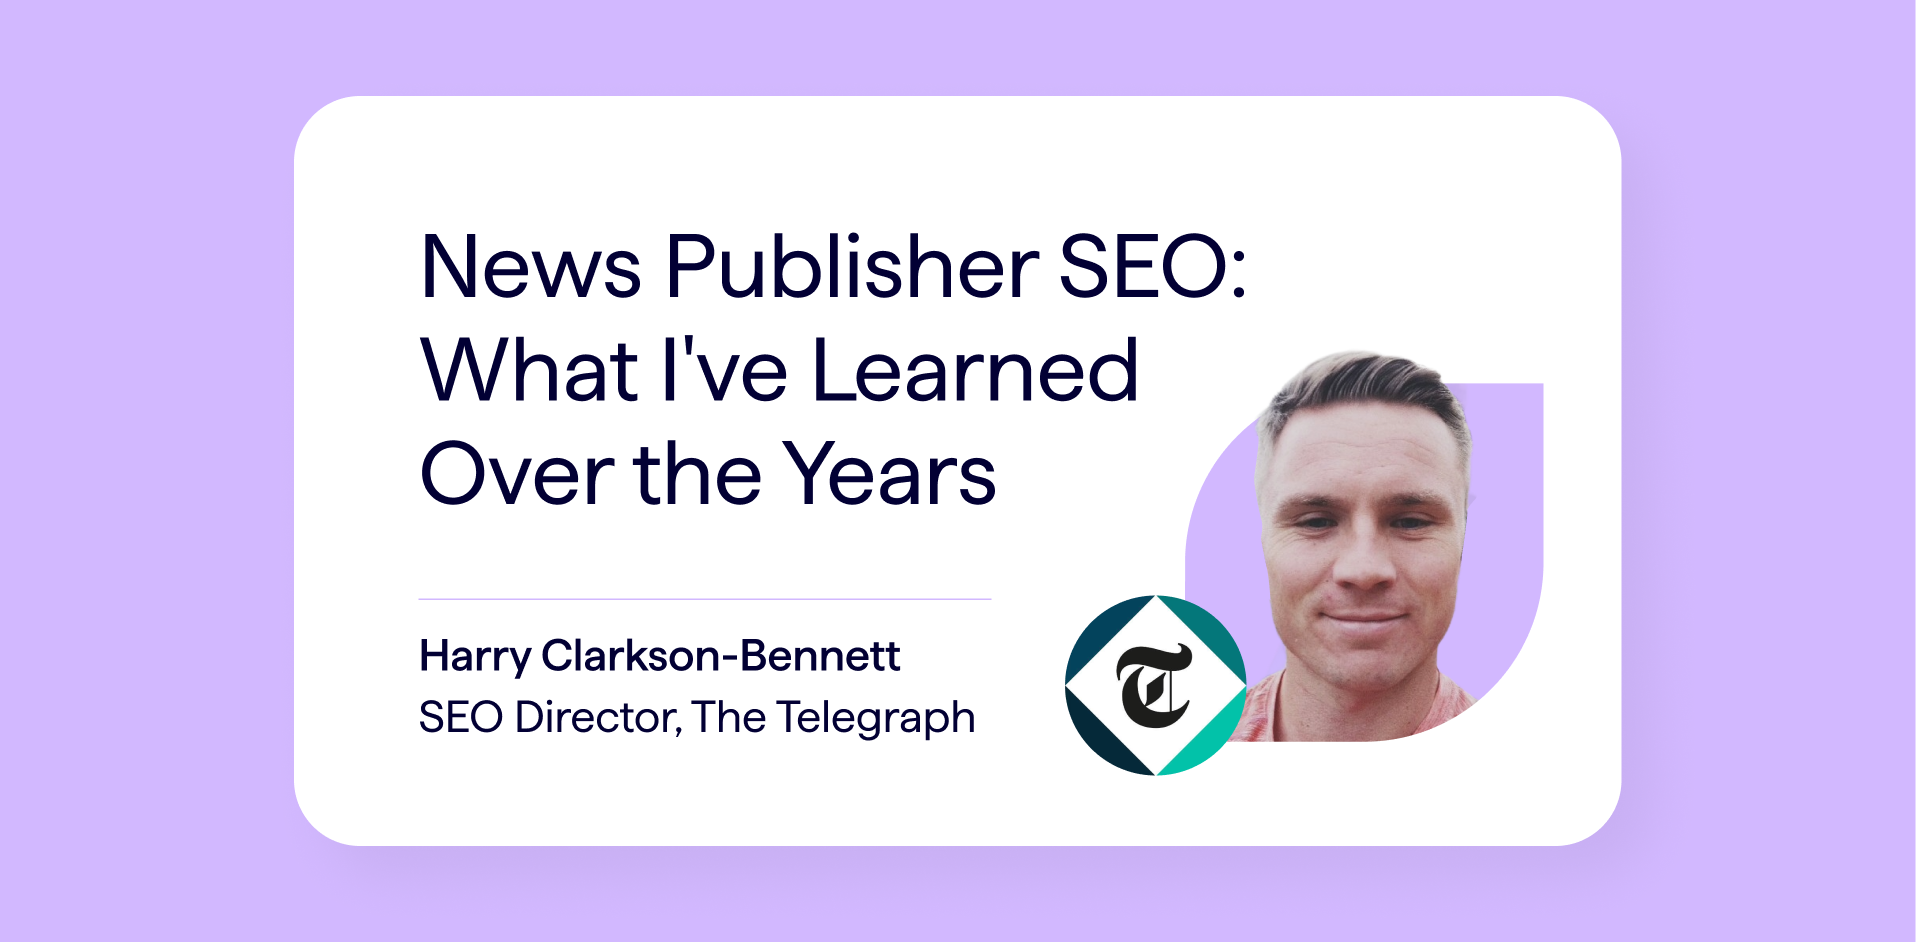 News publisher SEO strategies article - News Publisher SEO - What I've learned over the years. By SEO Director at the Telegraph, Harry Clarkson-Bennett.